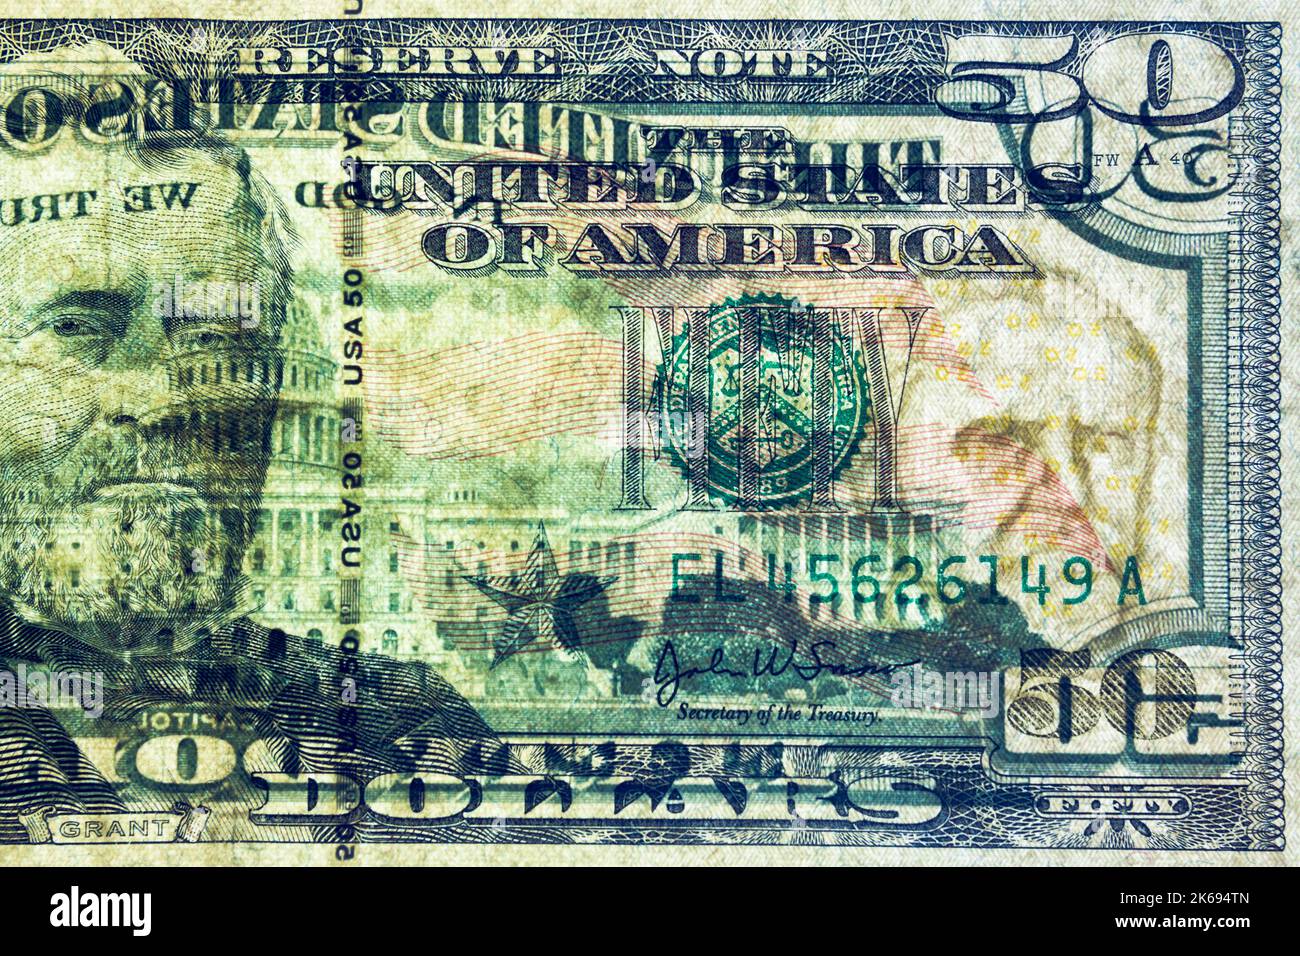 A United States of America 50 dollar bill has been backlit in order for the security watermark image portrait of President Ulysses S. Grant Stock Photo